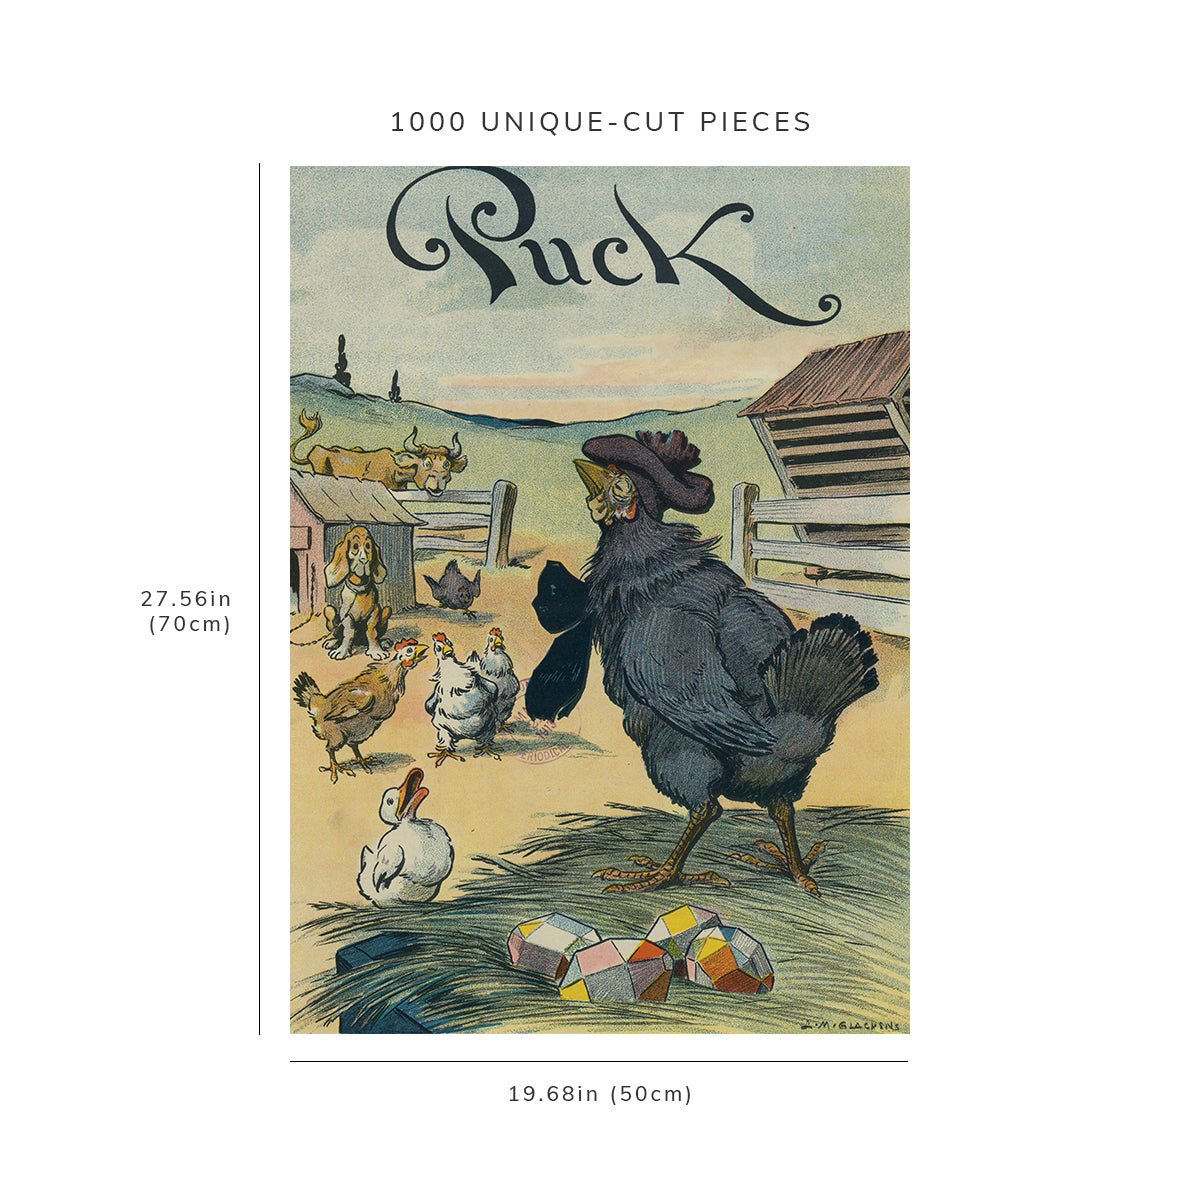 1000 piece puzzle - 1913 | Photo of Puck | The Latest in Easter Eggs | Glackens | Chickens | Barnyard | Cubism